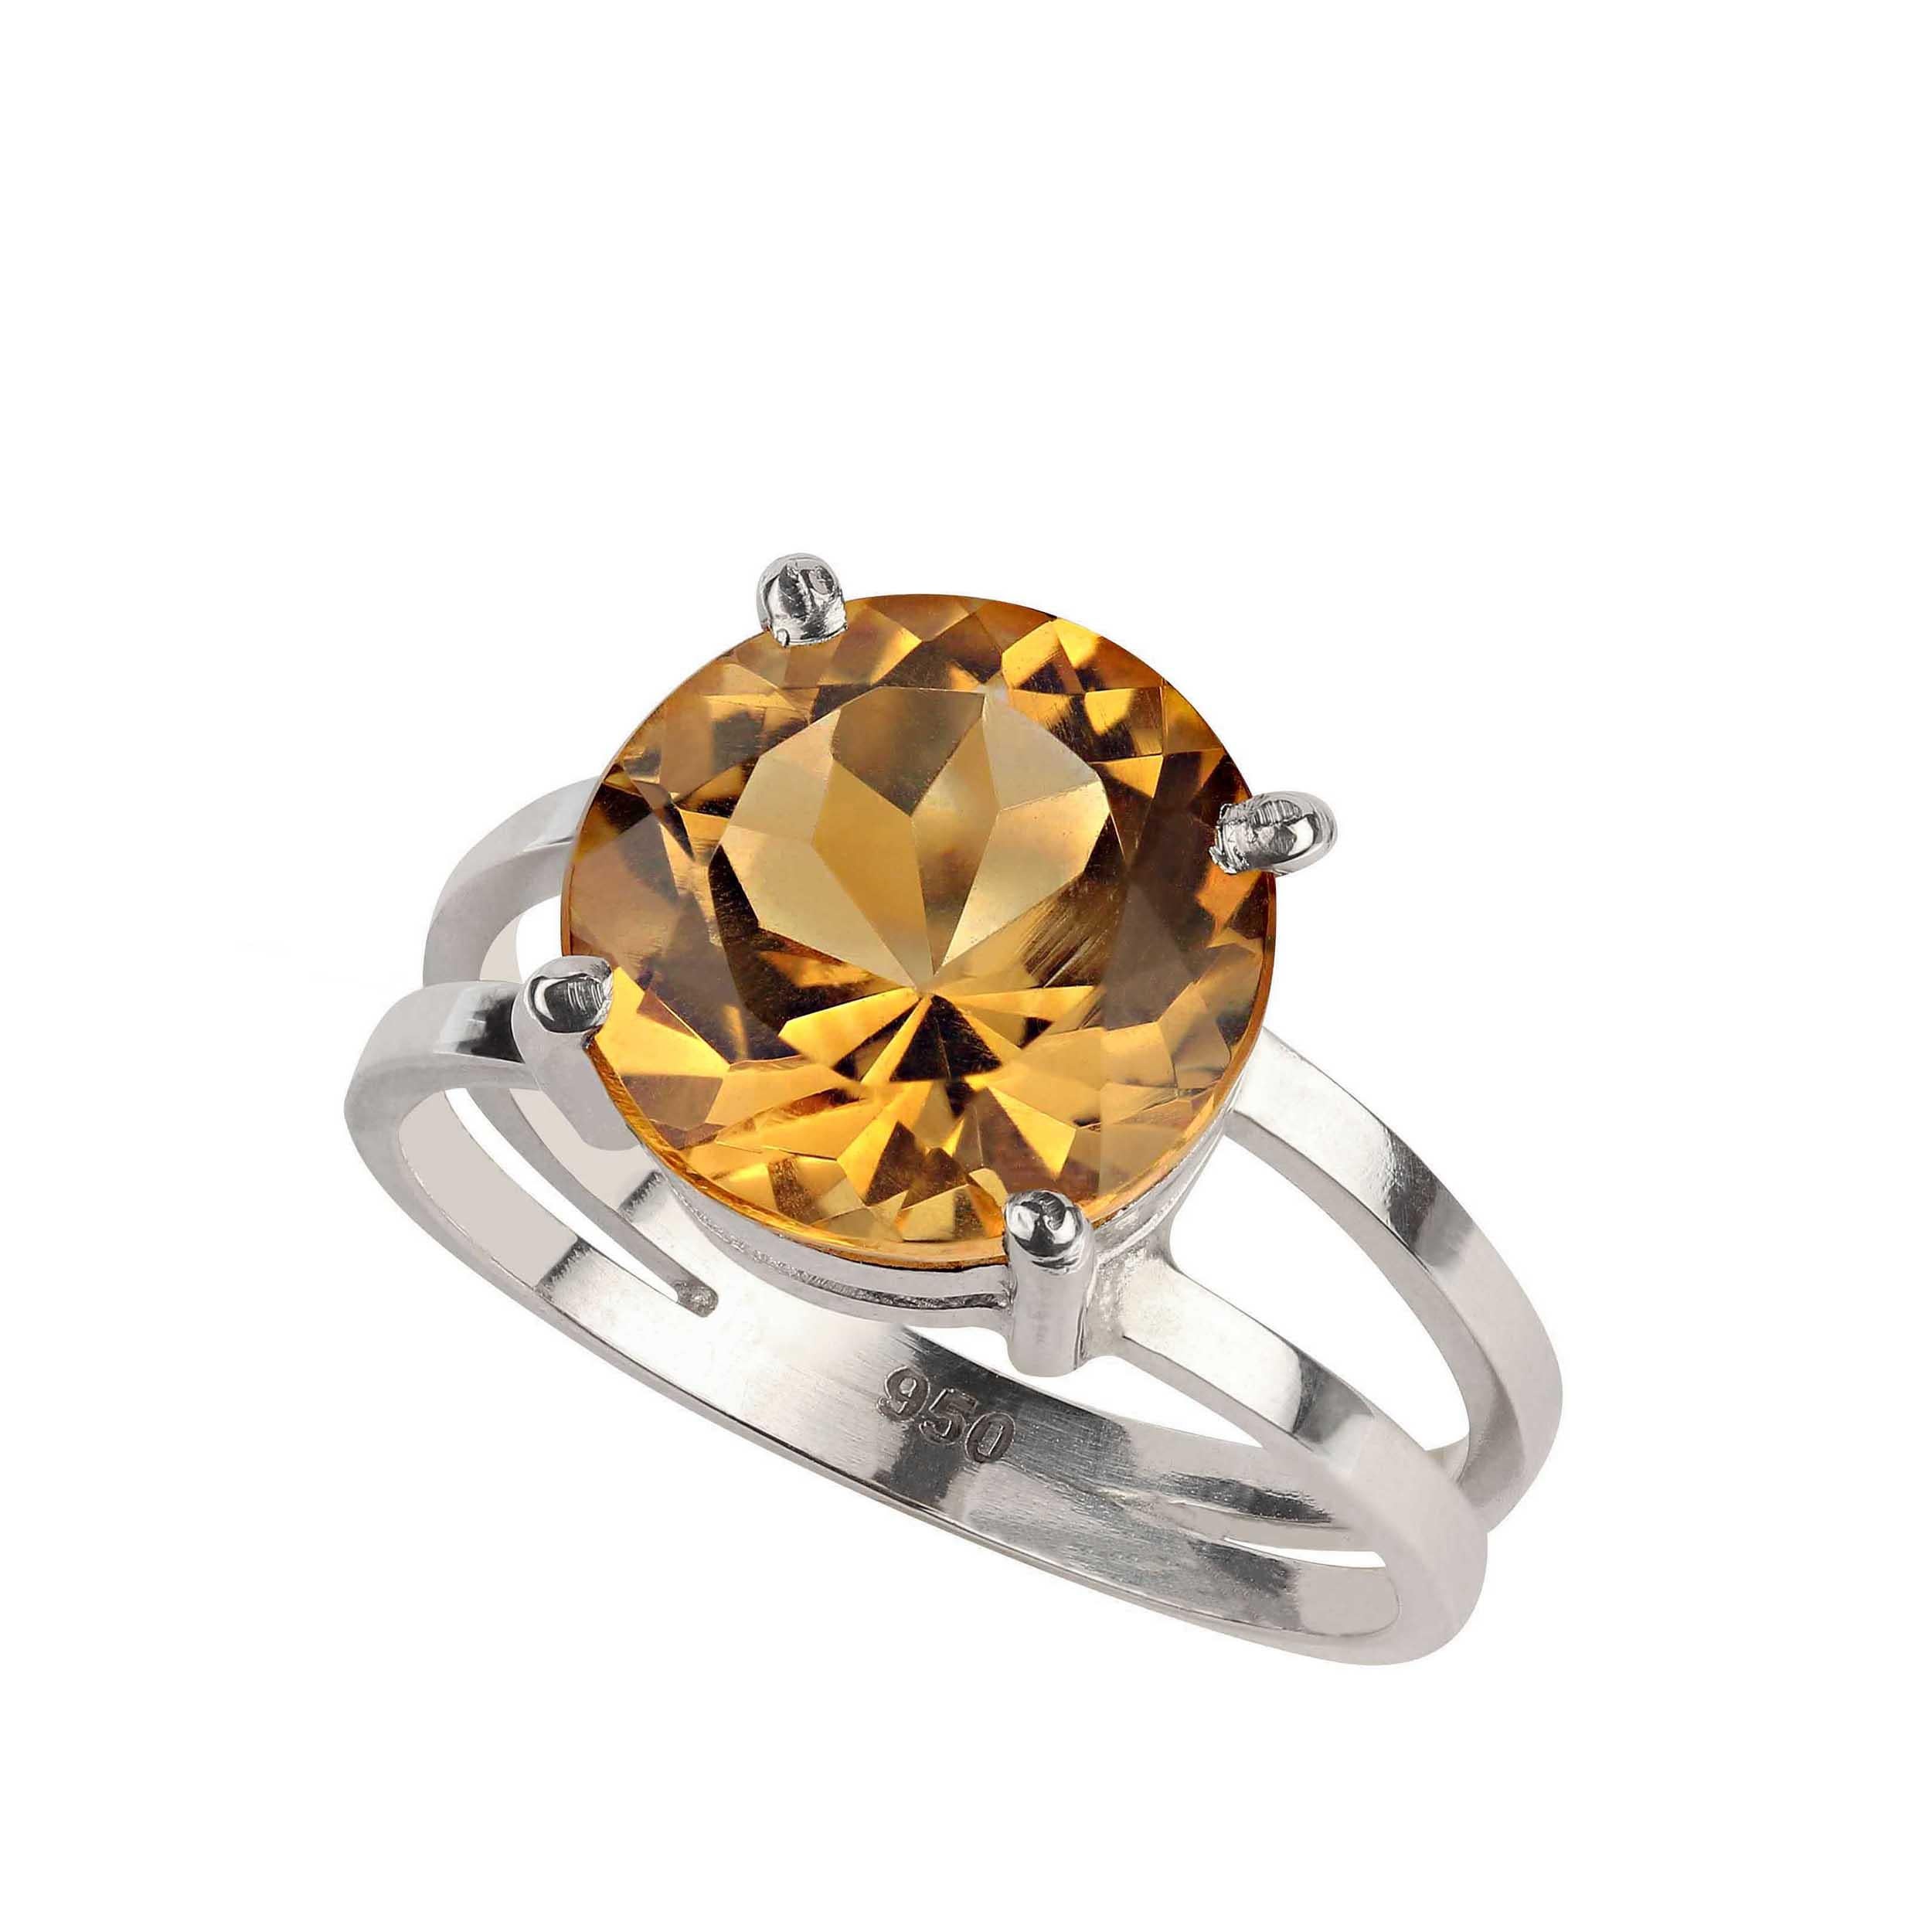 Round Cut AJD Unusual Round 4.3 Carat Citrine in Sterling Silver Ring